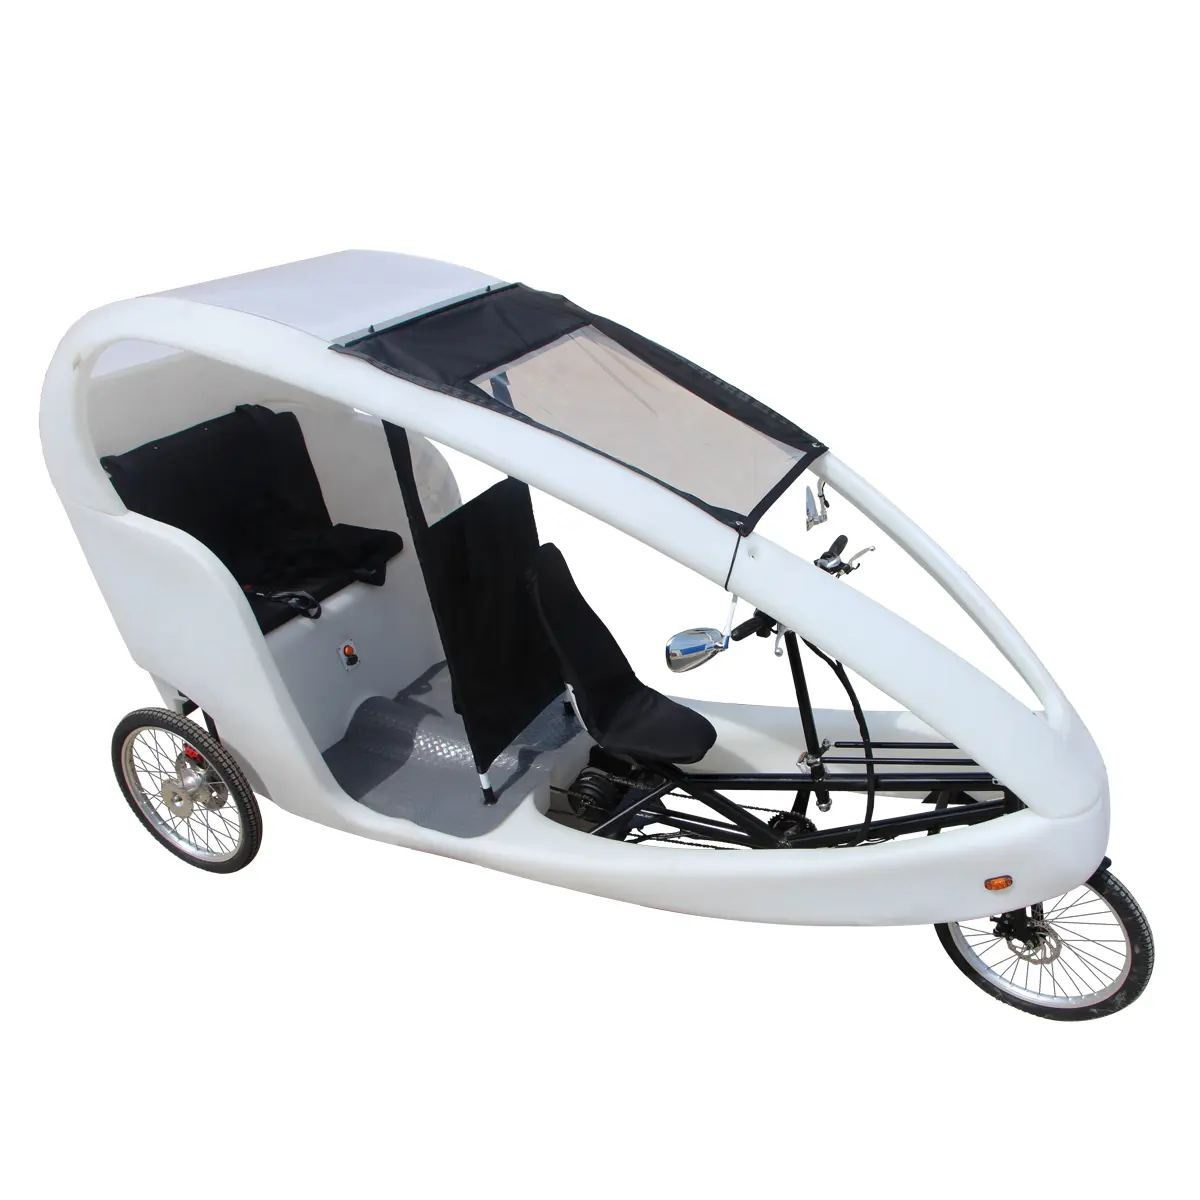 China manufacturer 6 Speed Pedal Assist 2 Passenger Adult Bicycle Recumbent Seat Trike Battery Auto Electric Rickshaw